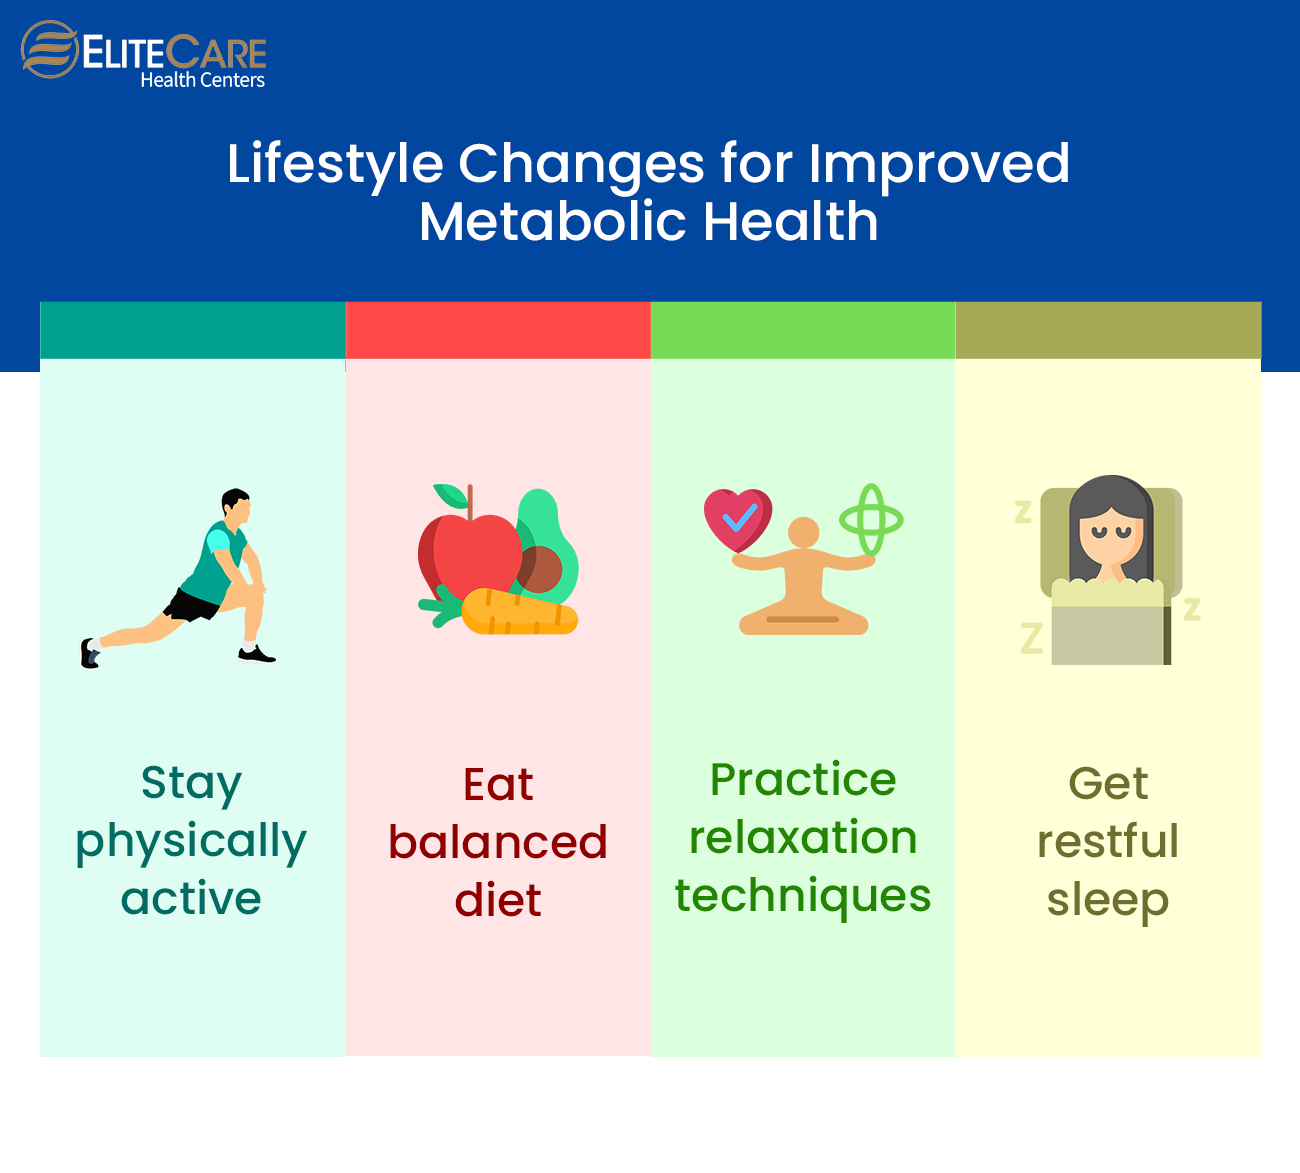 Lifestyle Changes for Improved Metabolic Health